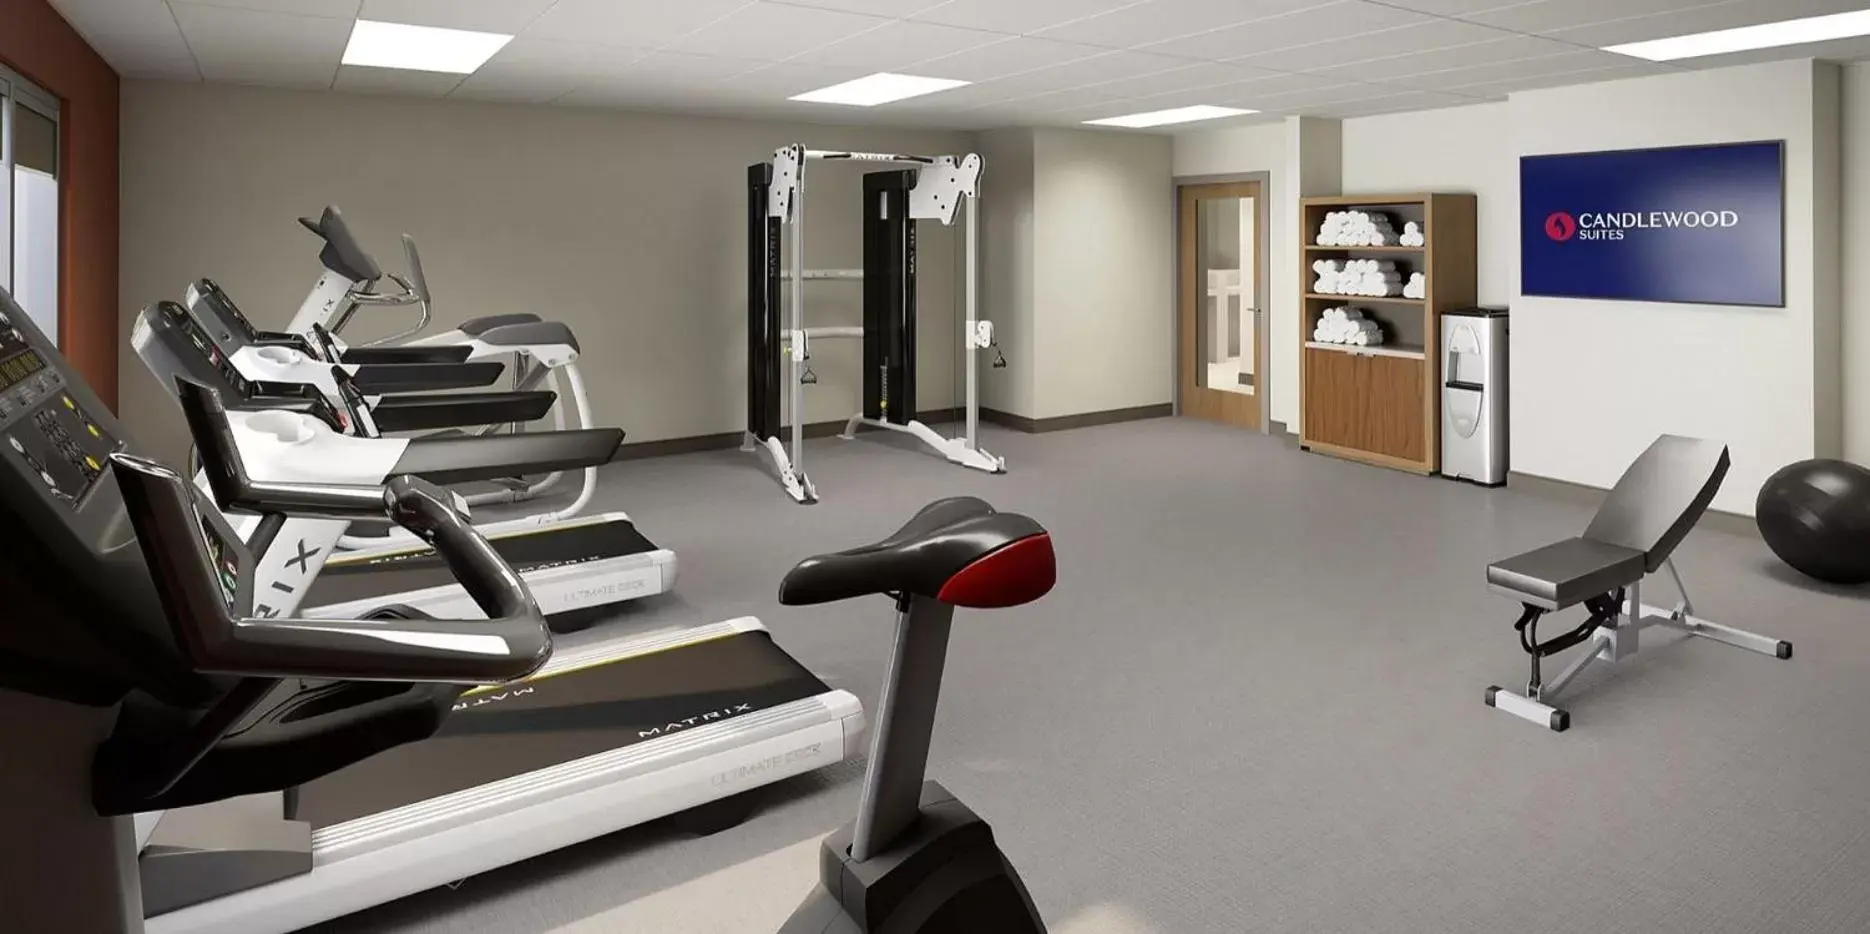 Fitness centre/facilities, Fitness Center/Facilities in Candlewood Suites - Corpus Christi - Portland, an IHG Hotel